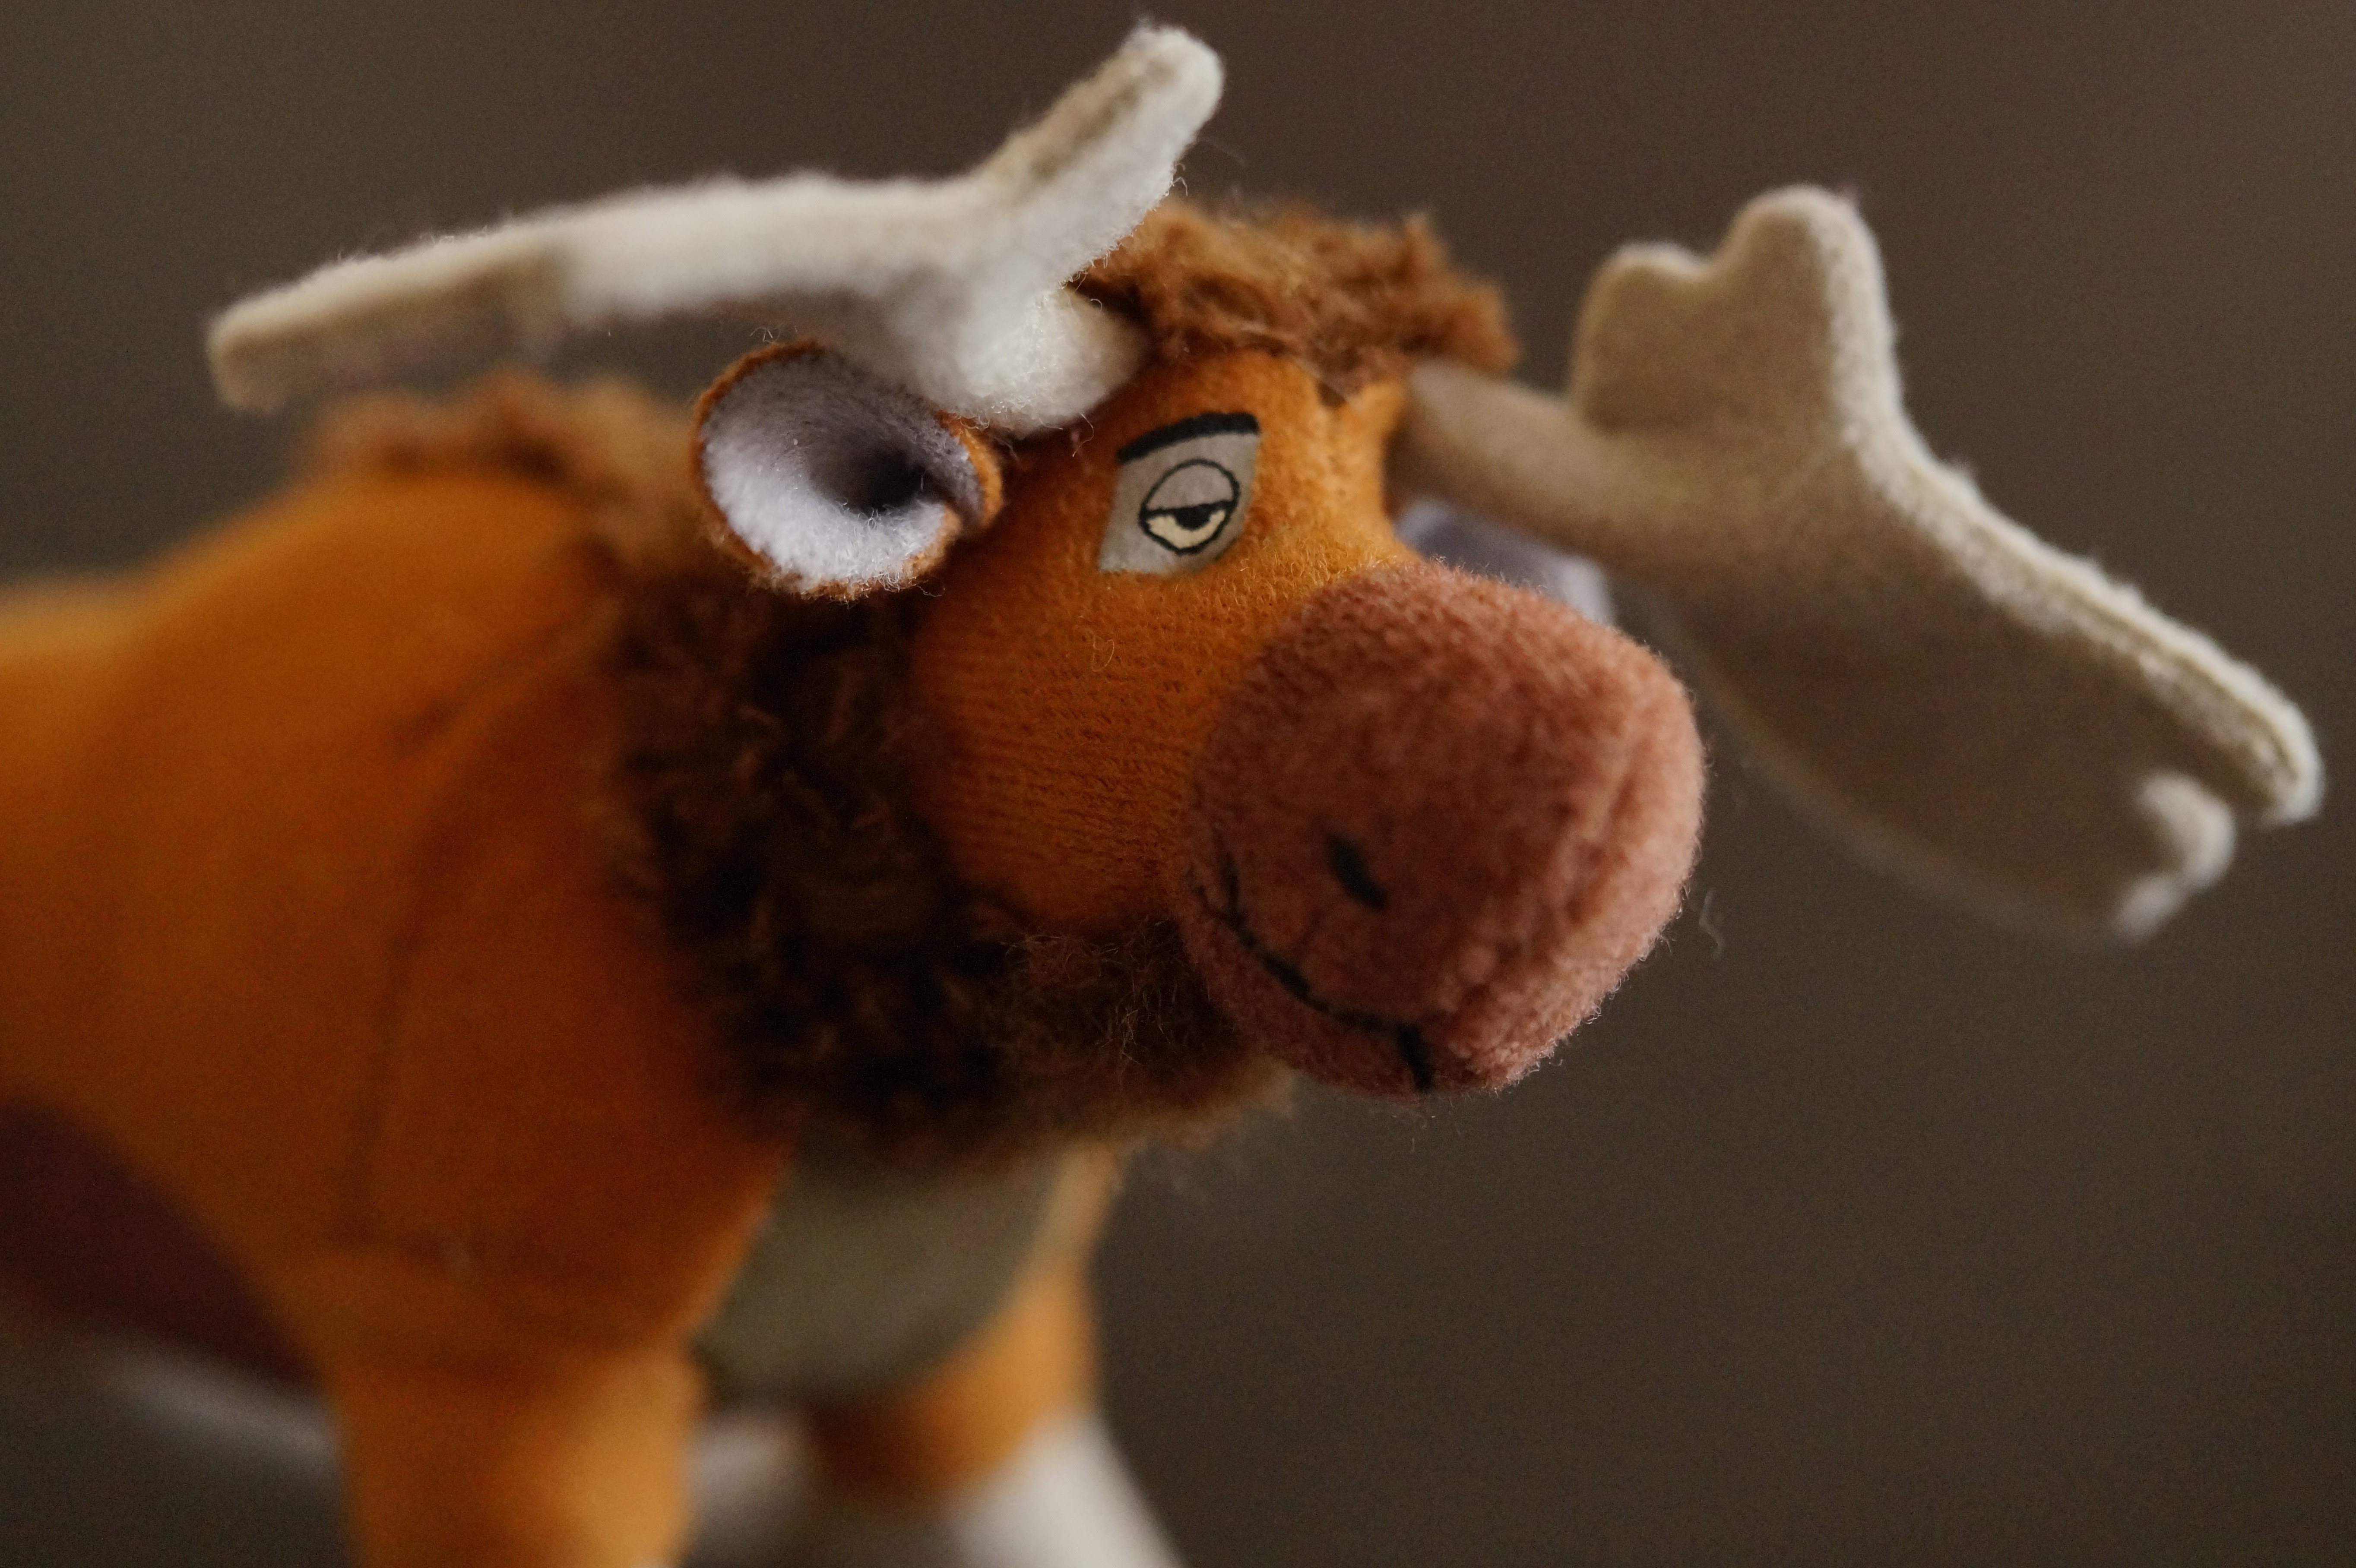 white and brown moose plush toy